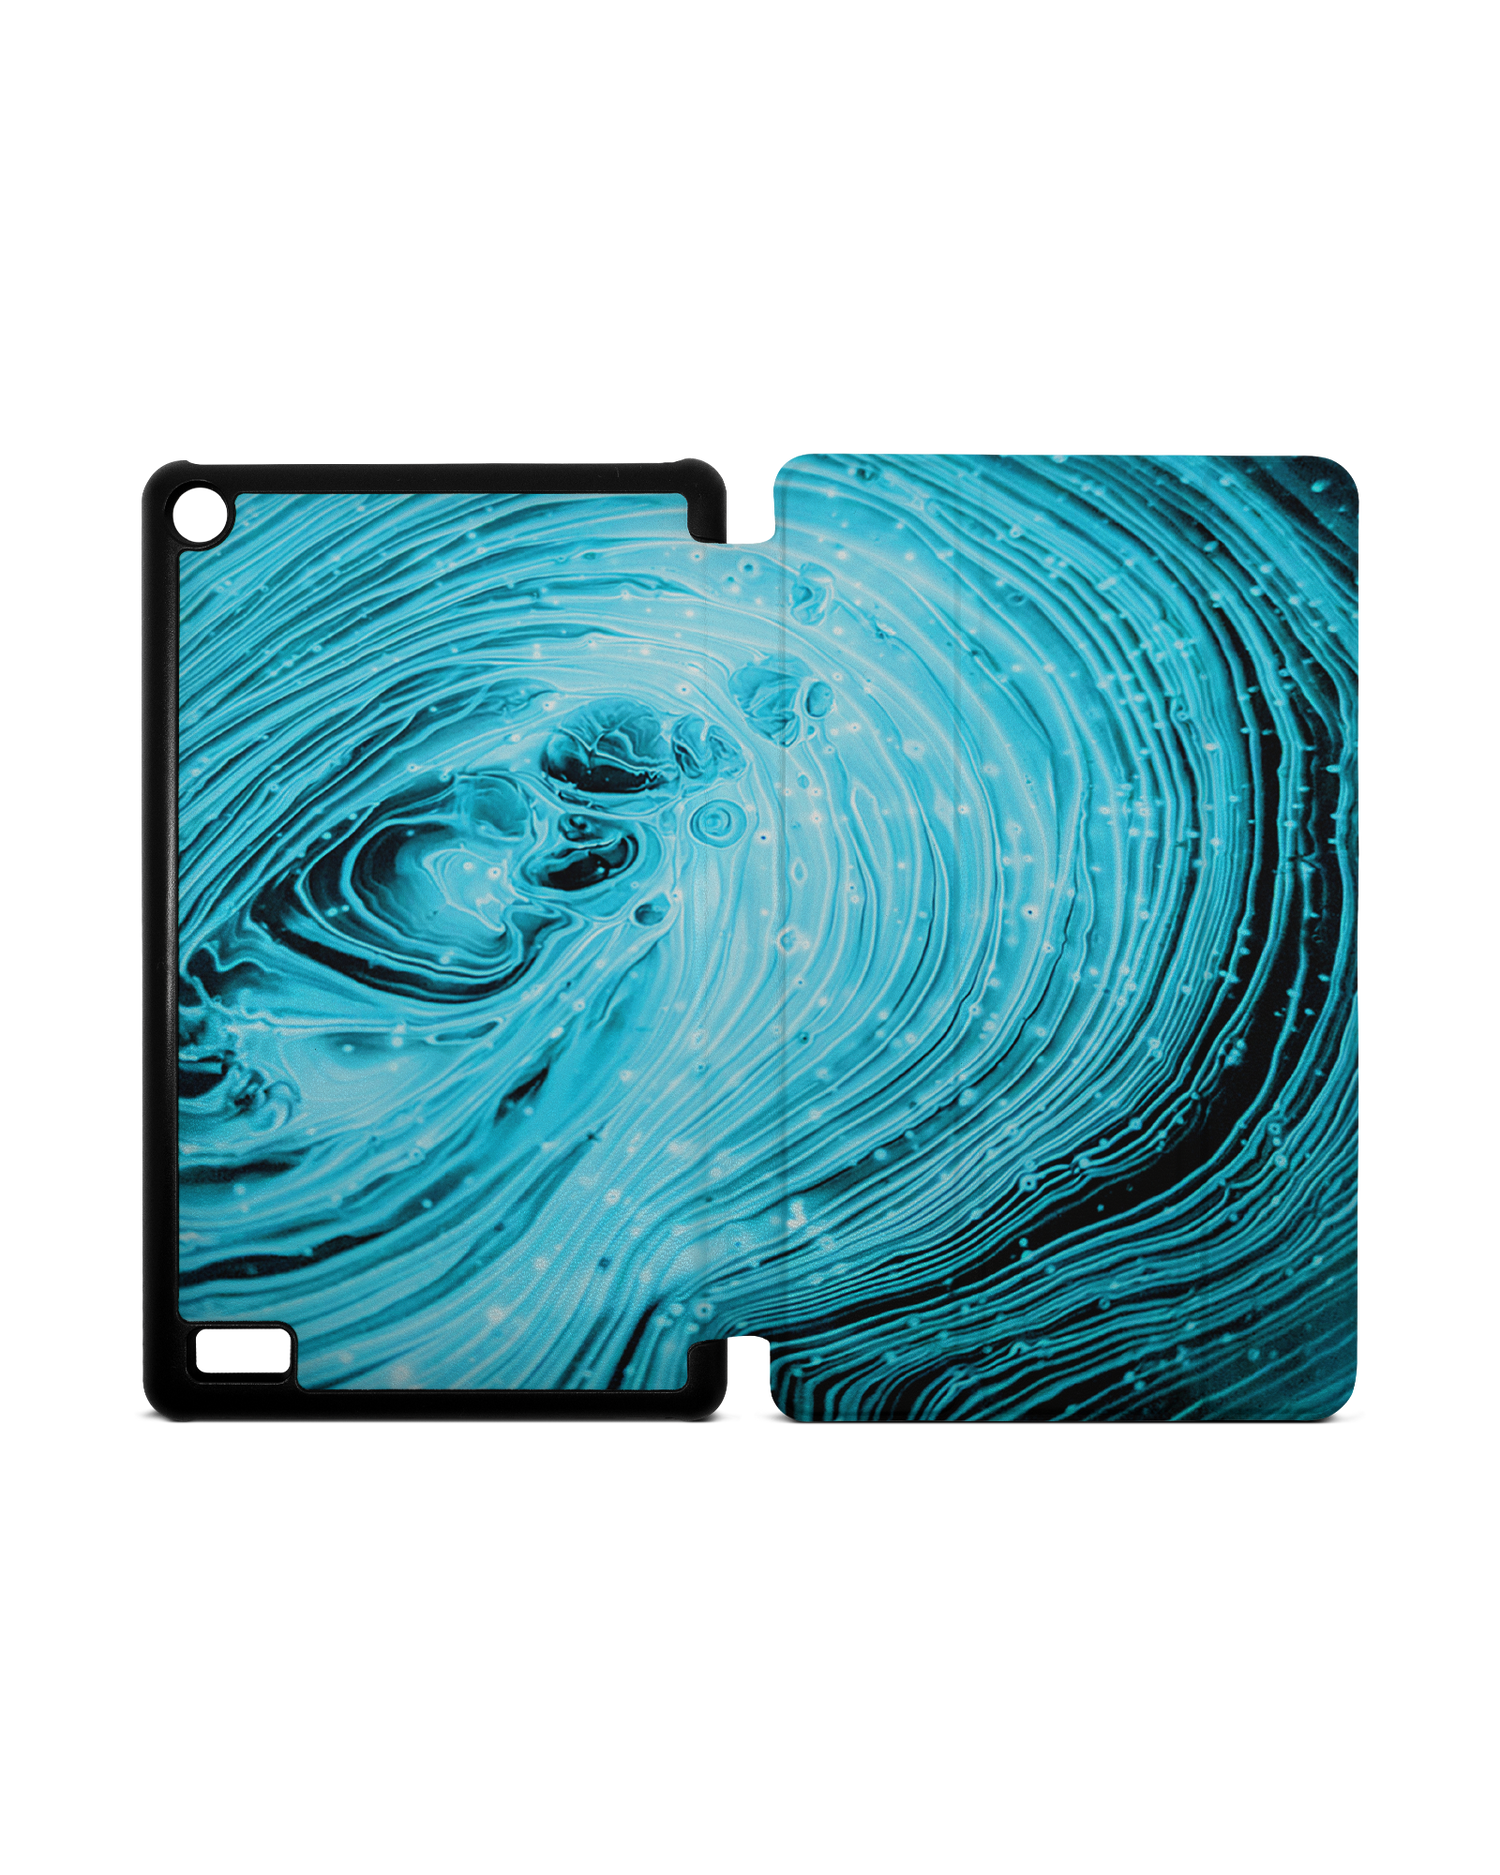 Turquoise Ripples Tablet Smart Case for Amazon Fire 7: Opened